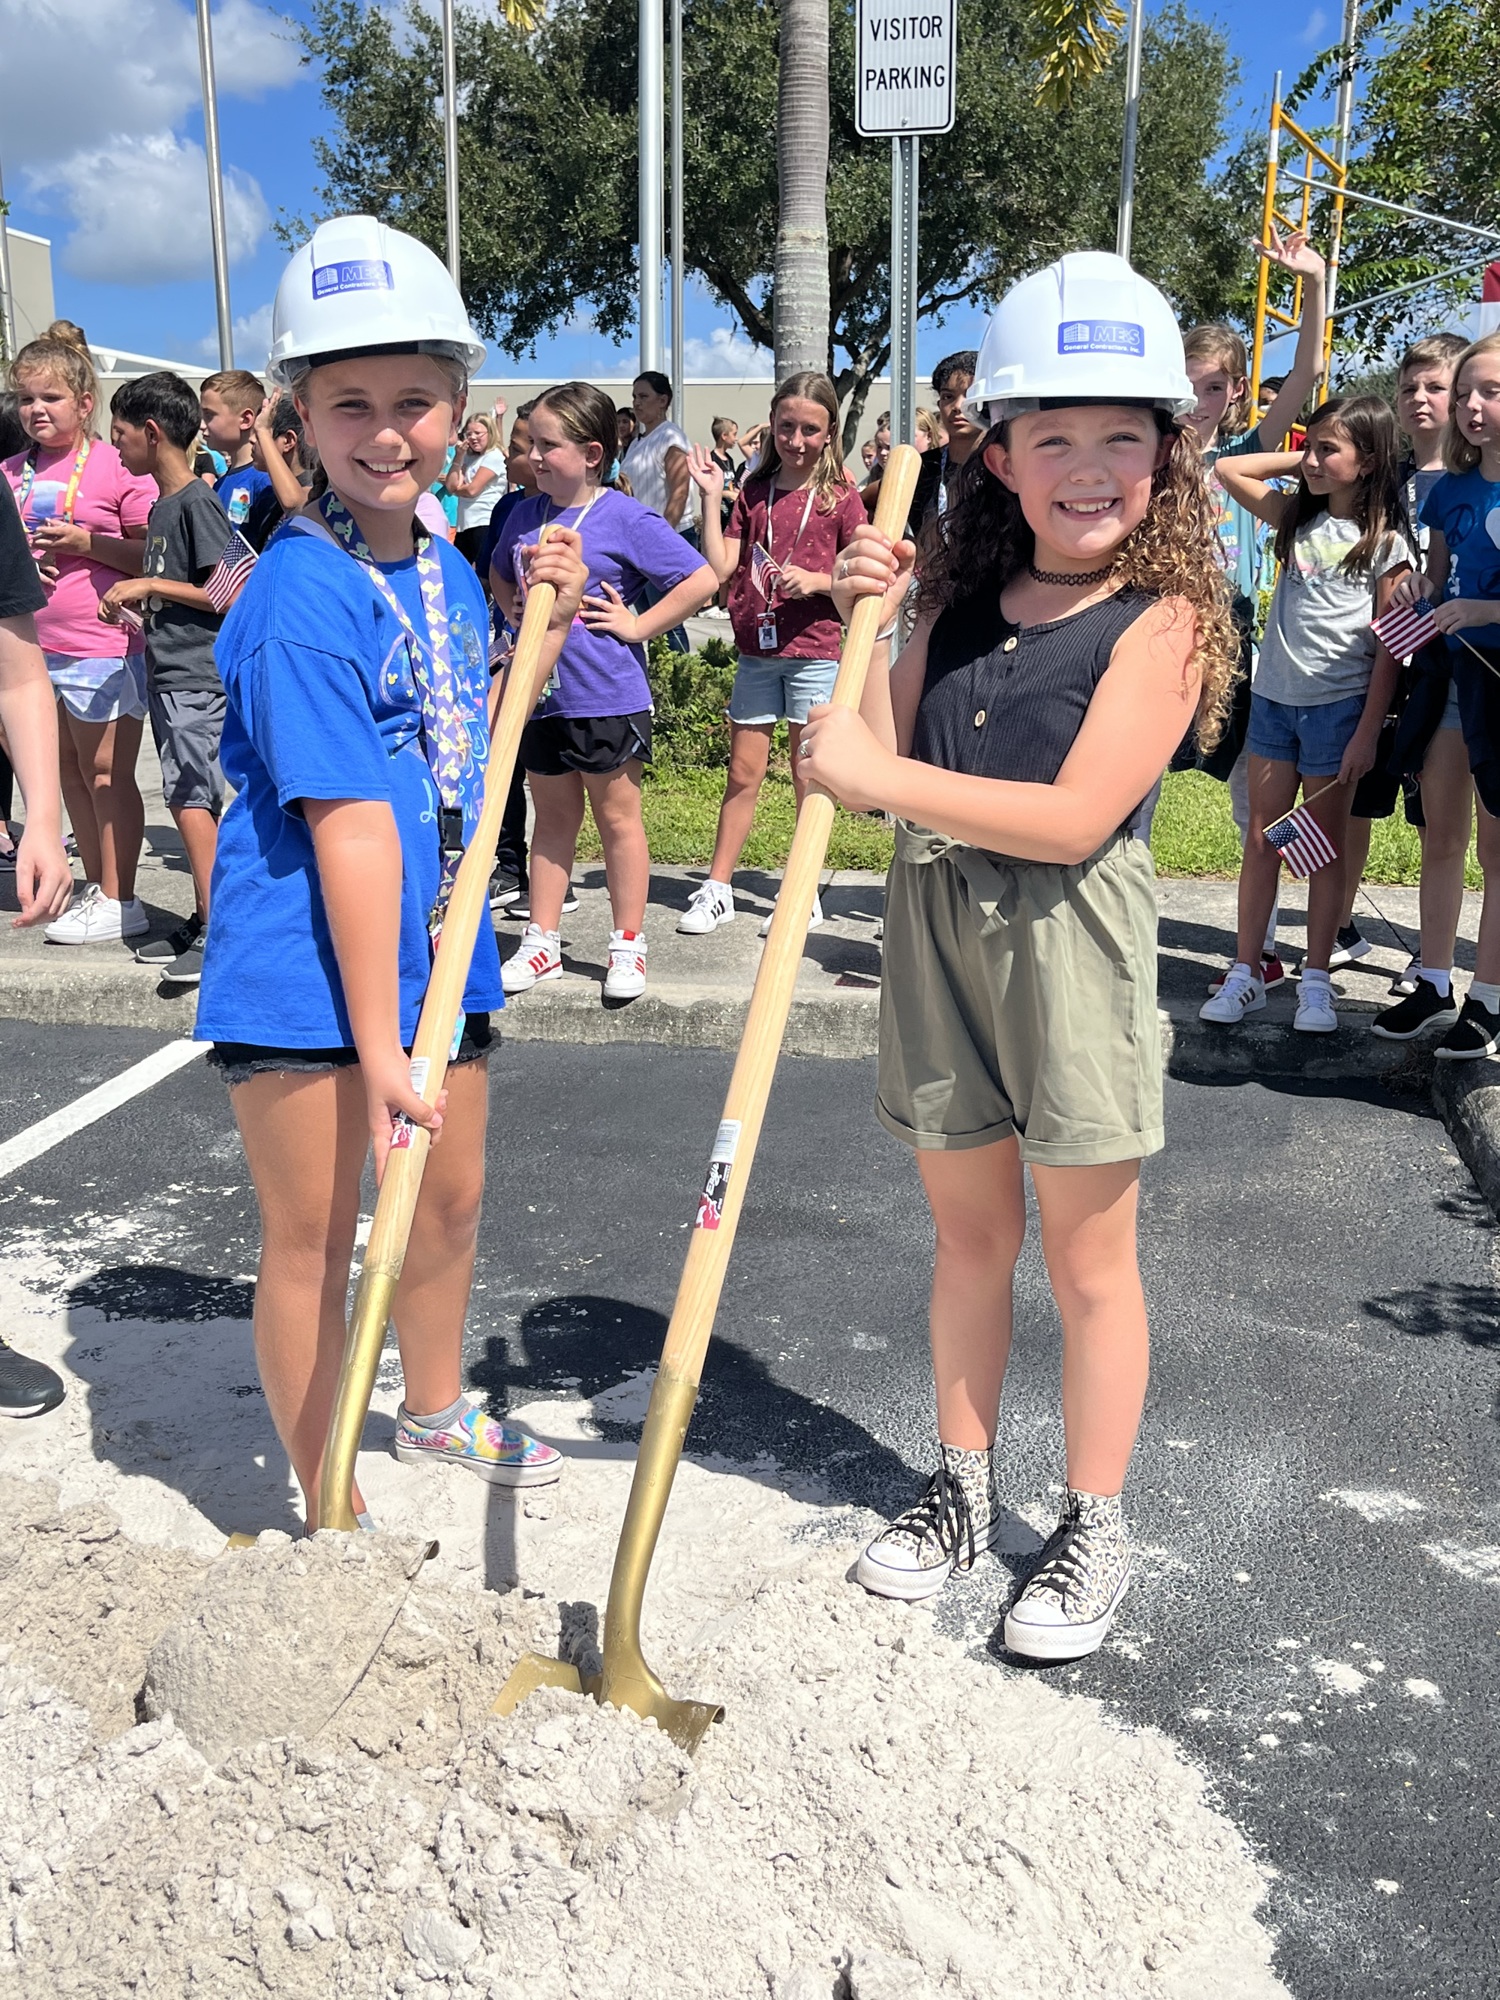 Freedom Elementary School fourth graders Lainie Prater and Jalee Harnish put on hard hats and grab shovels to celebrate the groundbreaking of their school's new addition. (Photo by Liz Ramos)